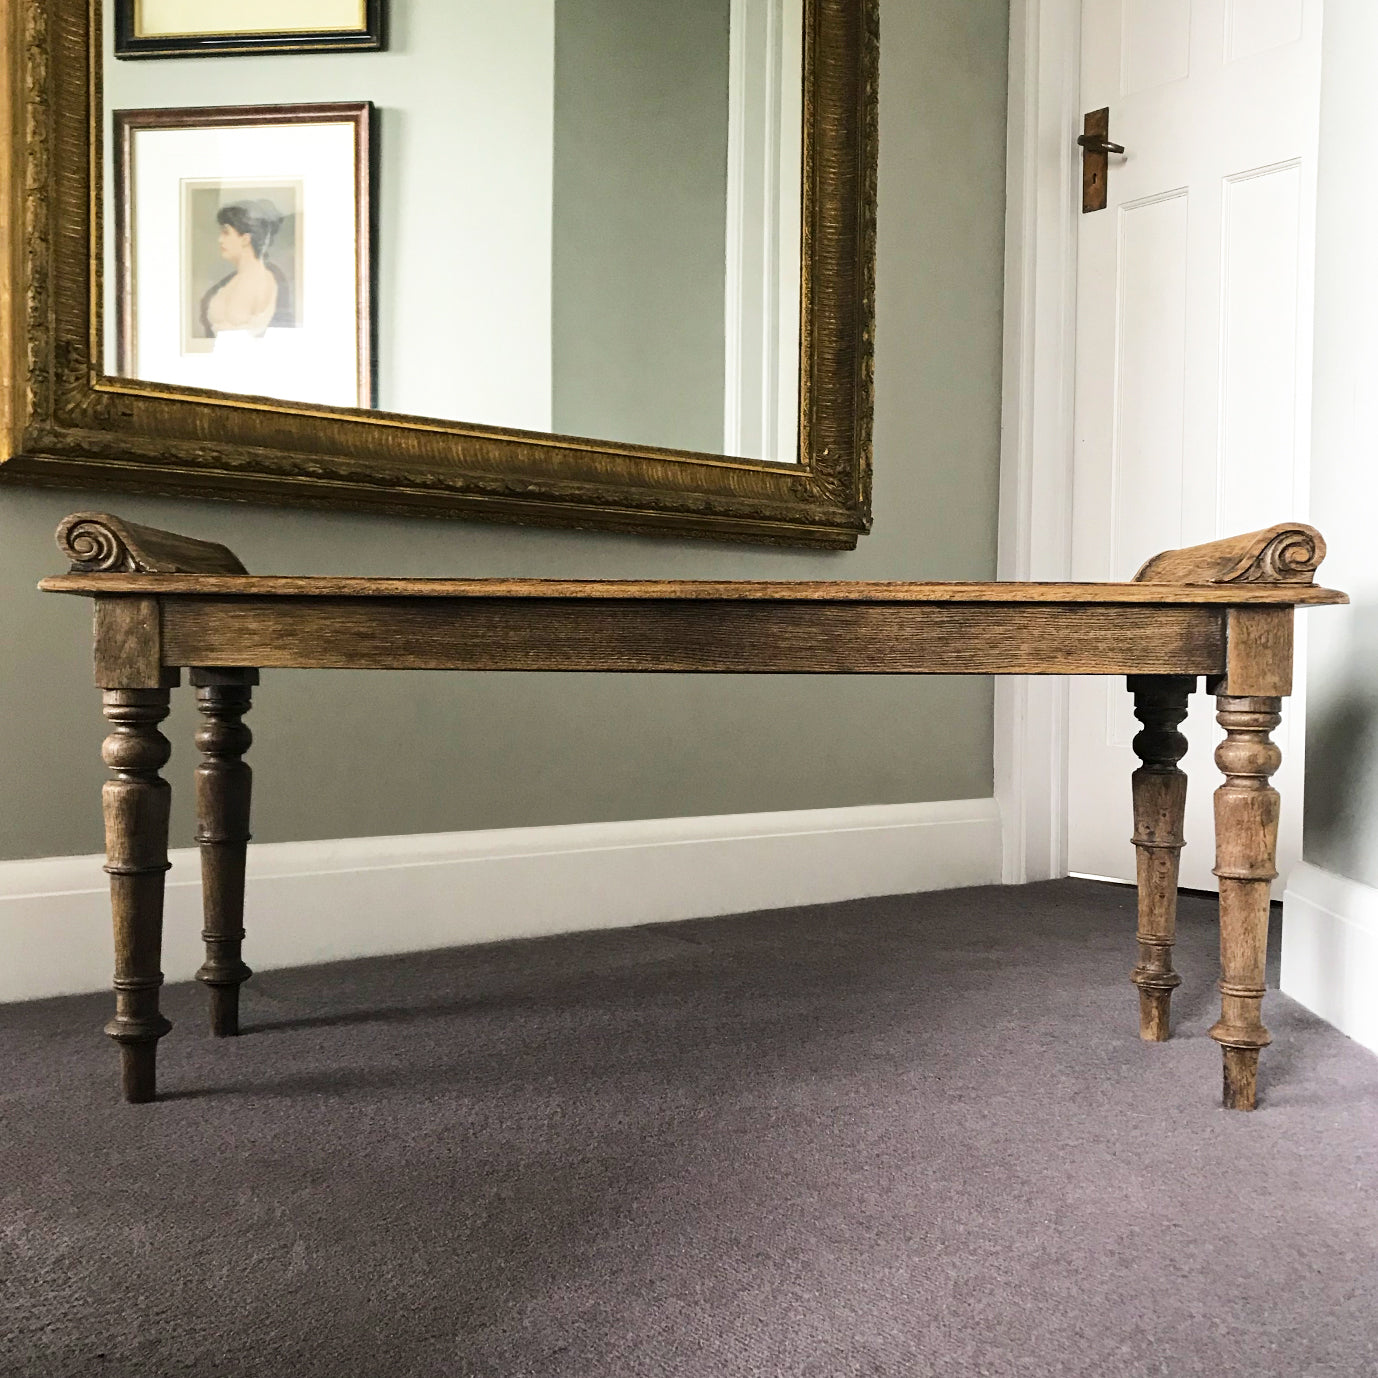 Scroll top window seat in oak. A practical and versatile size, perfect for the hallway, end of a double bed or in the bay of a window. Detailed scroll work to the top corners with good looking turned legs - SHOP NOW - www.intovintage.co.uk